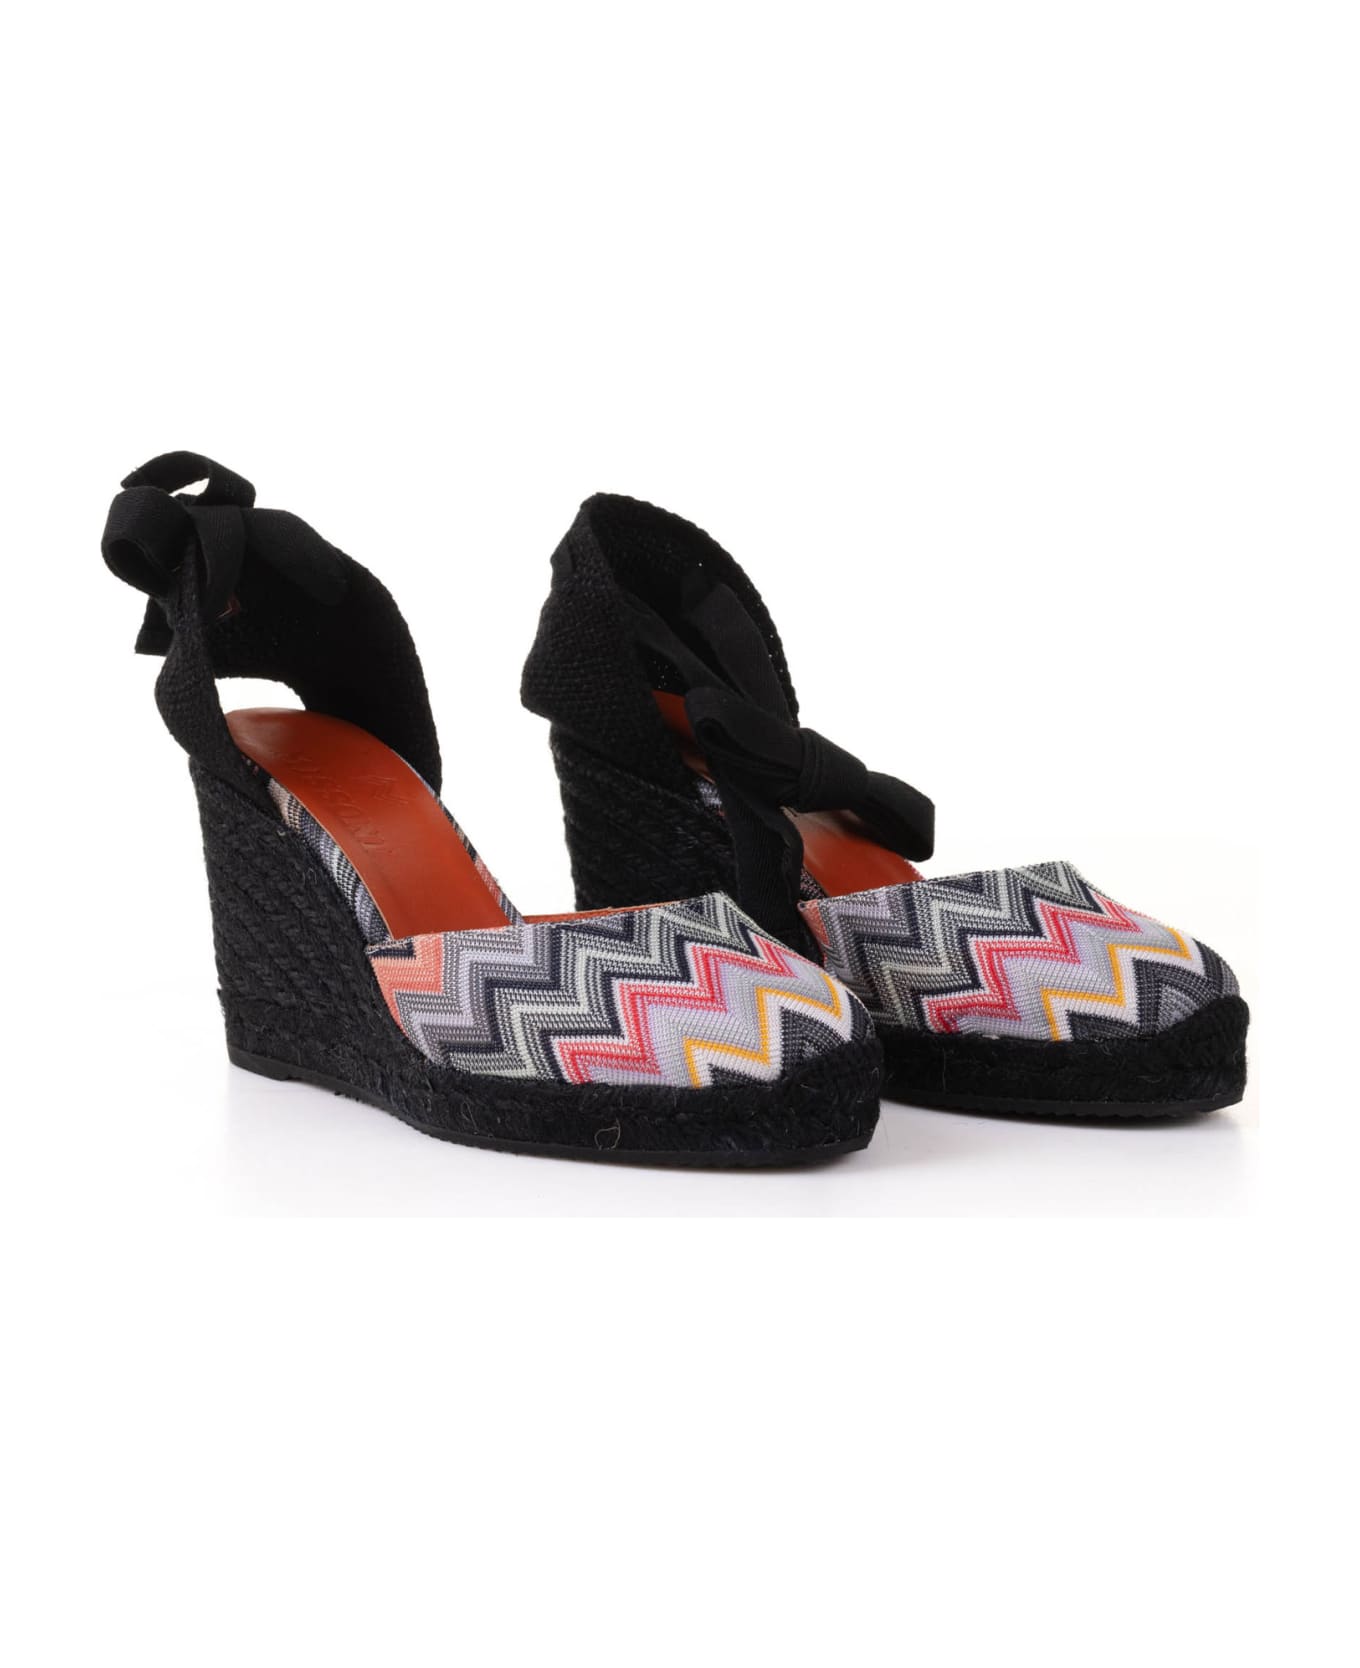 Missoni Espadrilles In Chevron Fabric With Wedge And Ankle Laces - BLACK ウェッジシューズ